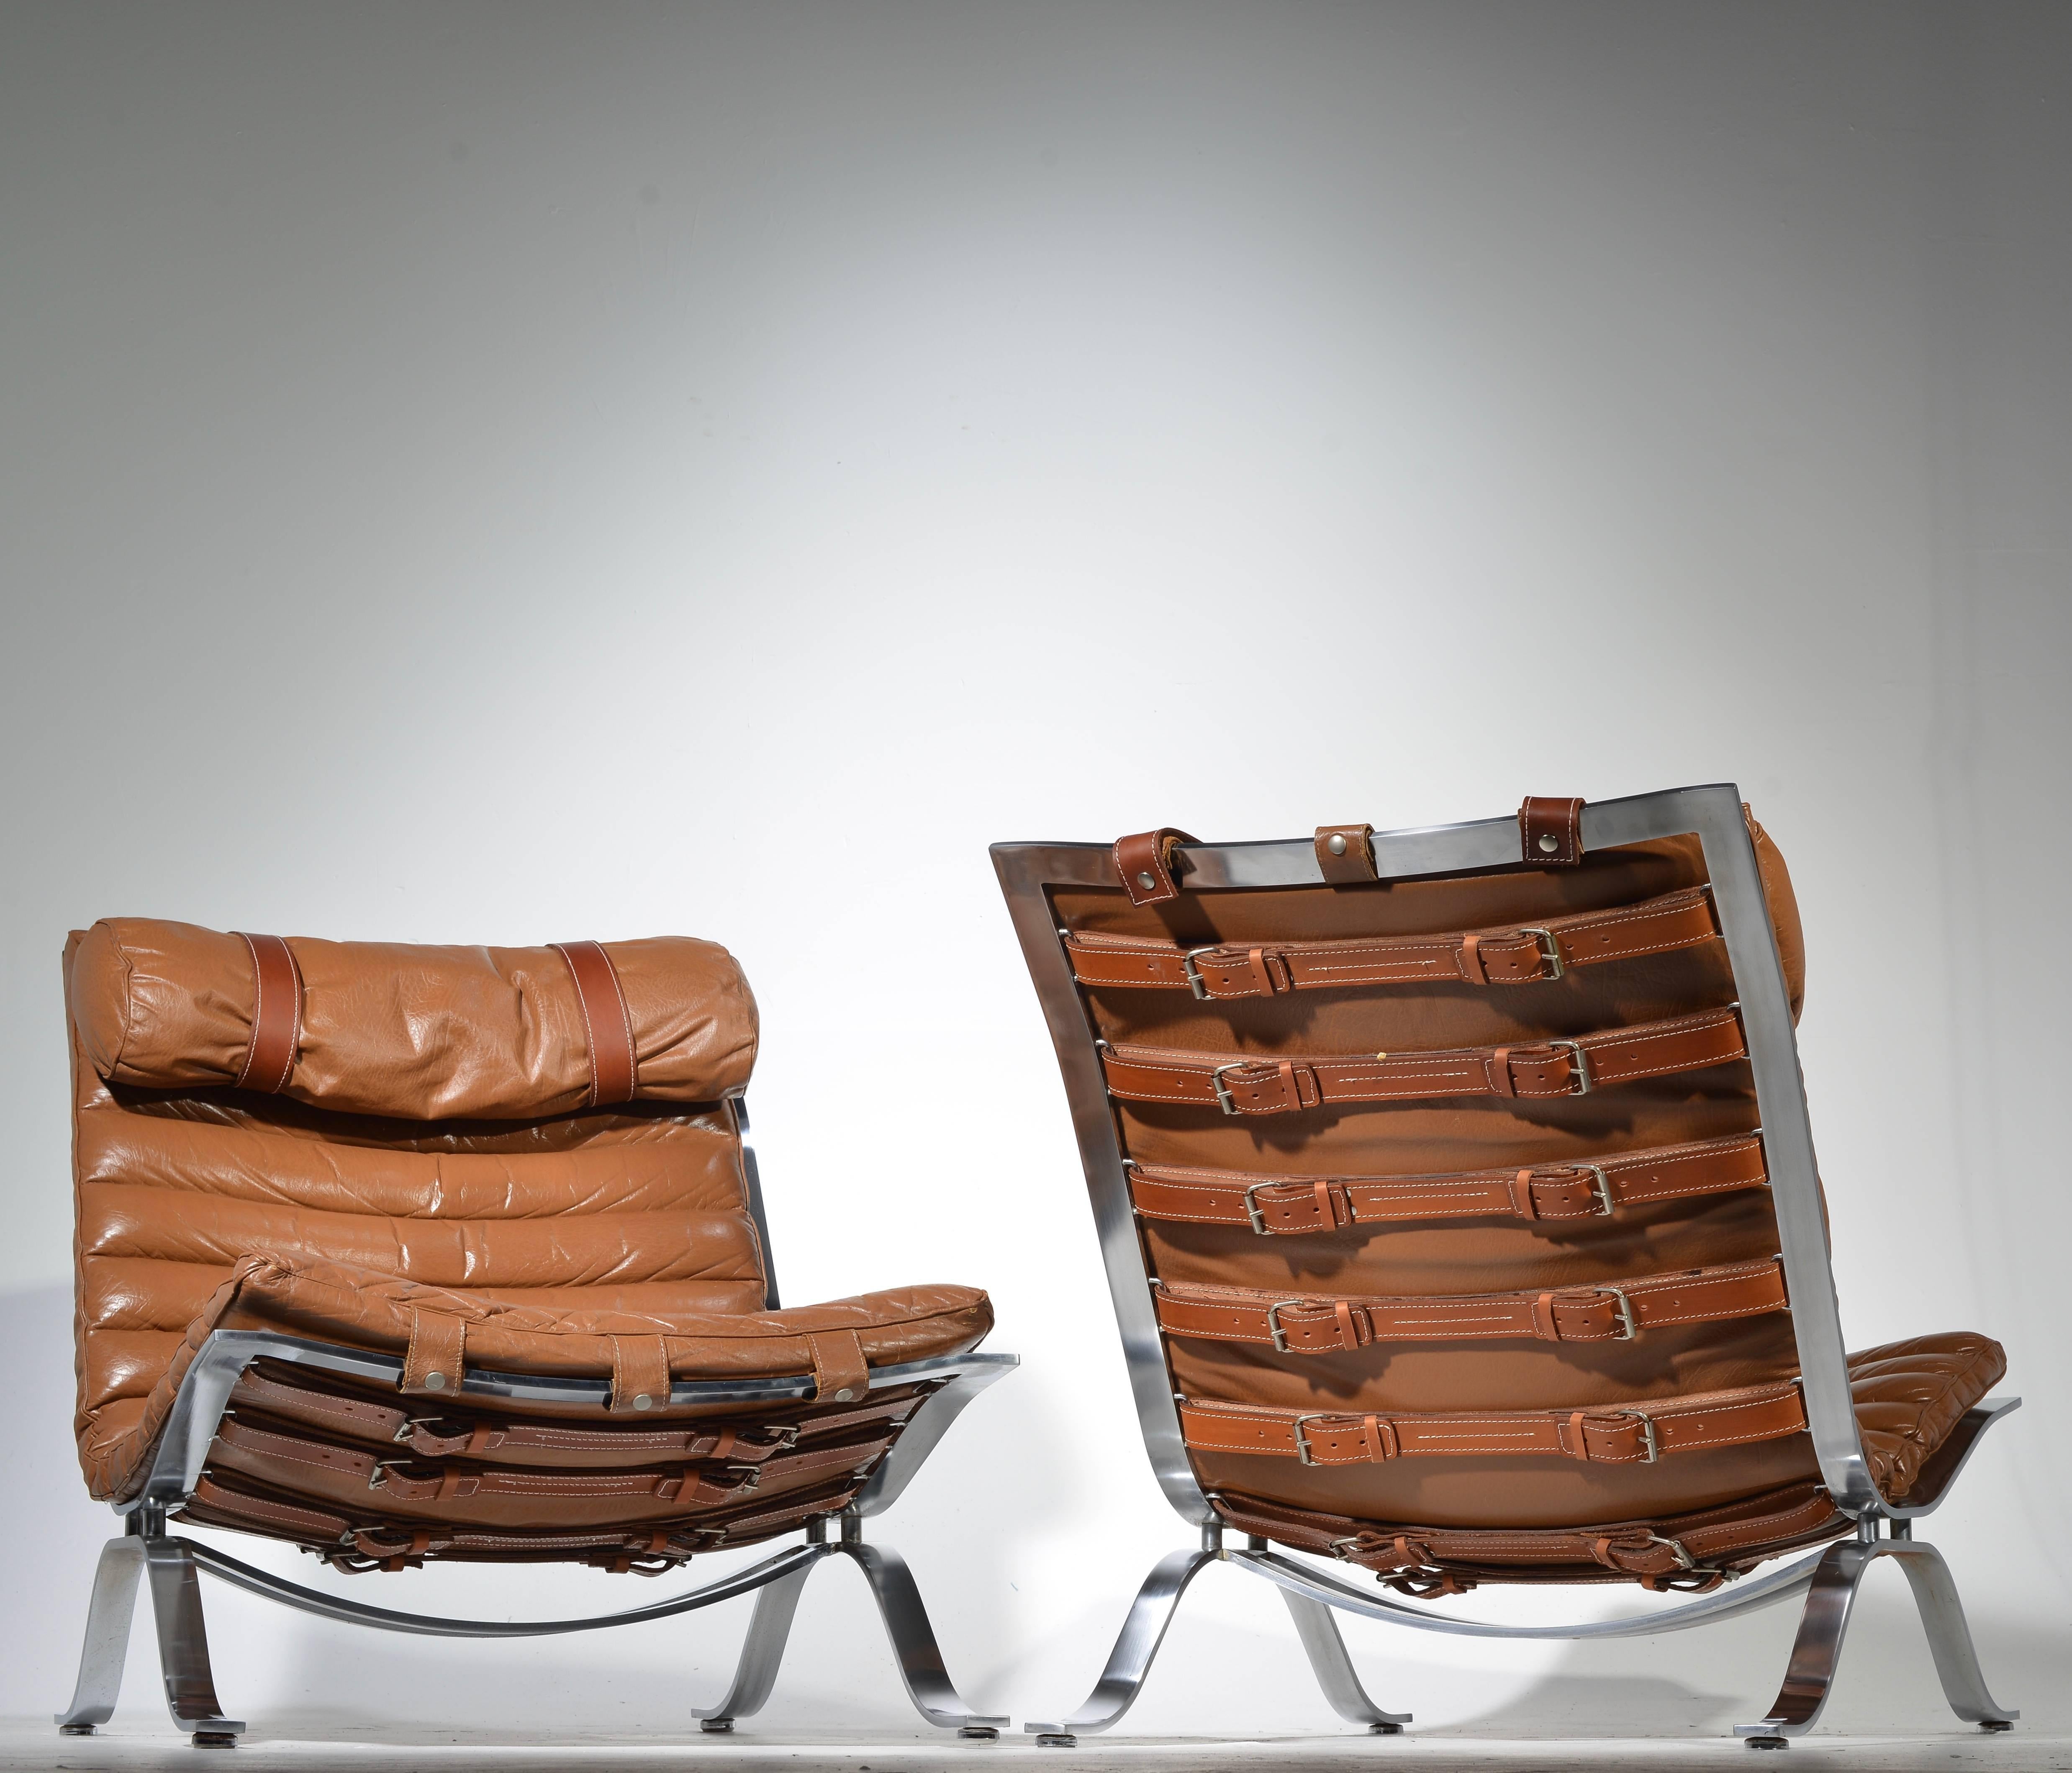 An amazing pair of Ari chairs designed in 1966, by Arne Norell. Produced by Arne Norell AB in Aneby, Sweden. The strapping has been professionally replaced.